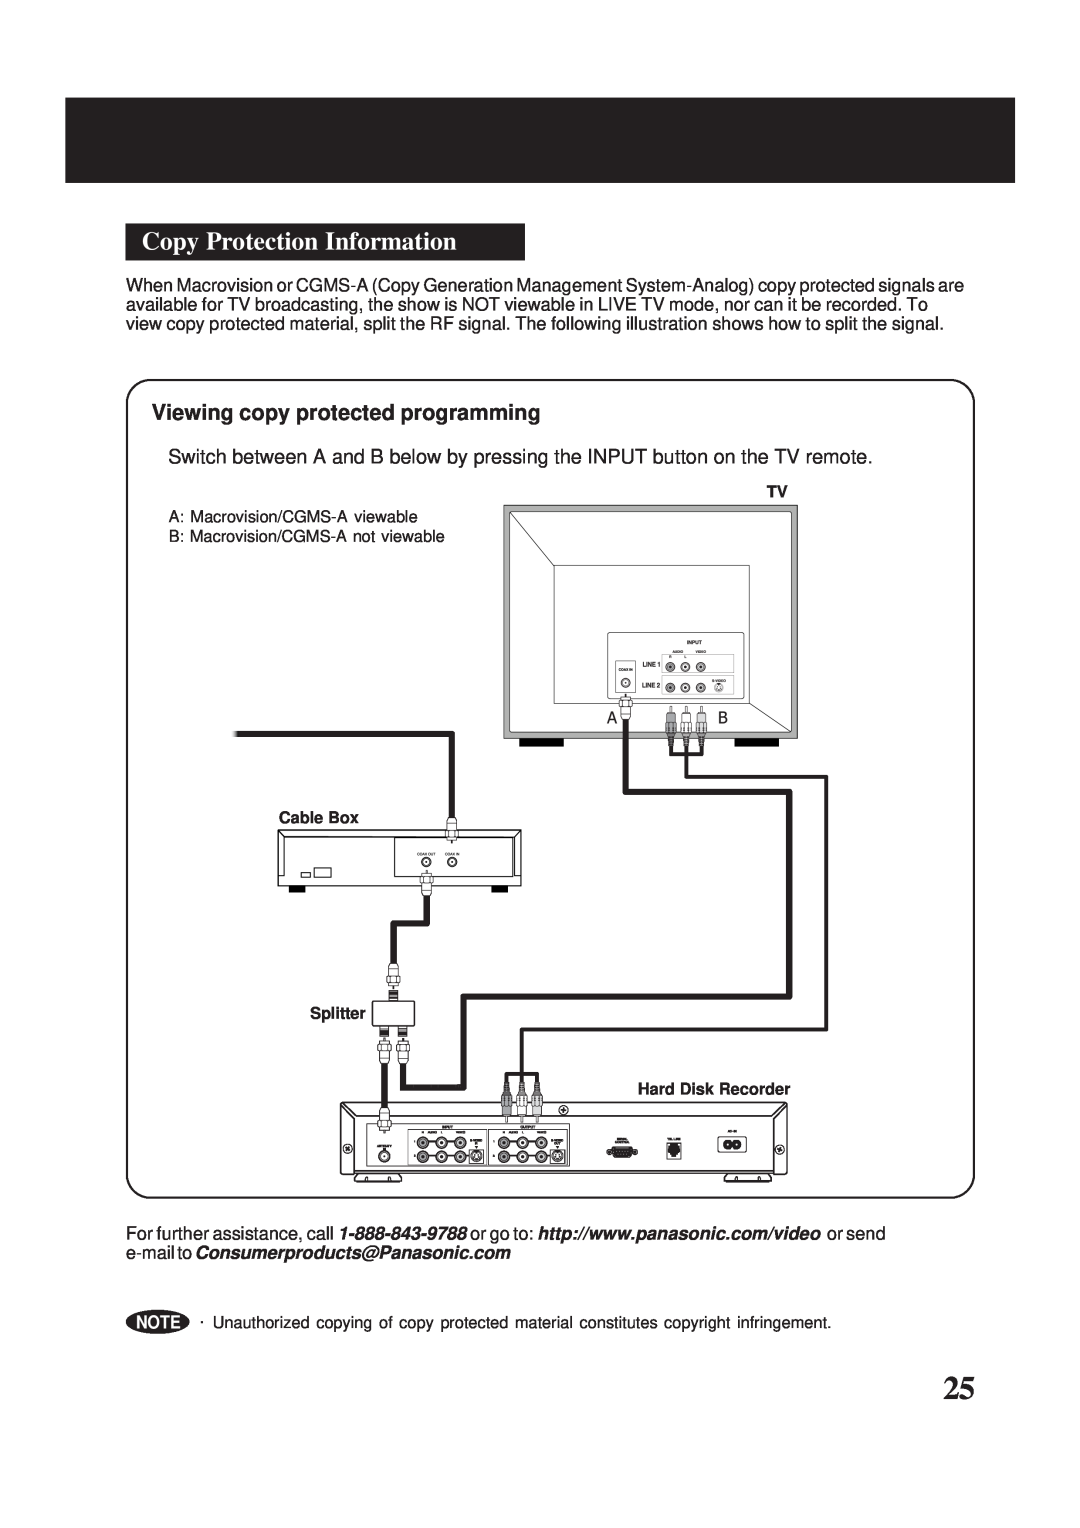 Panasonic PV-HS2000 operating instructions Copy Protection Information, Viewing copy protected programming 